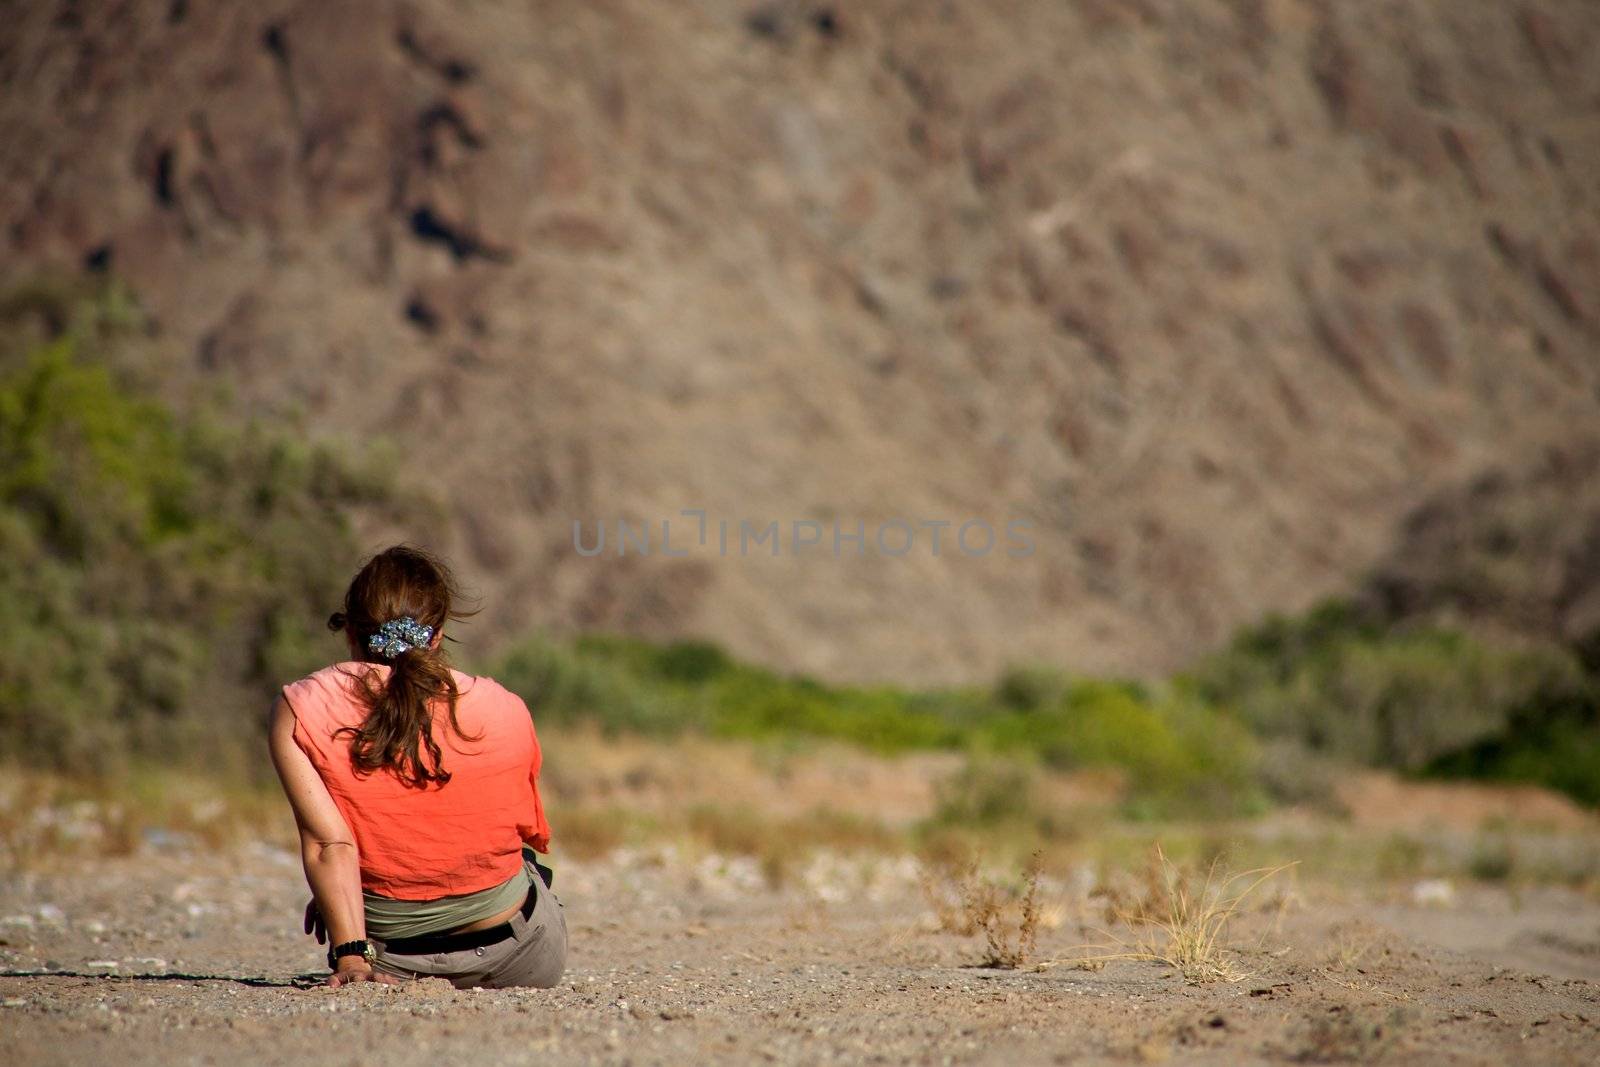 Women alone sitting in the bush somwhere in Namibia wit a red t-shirt and a blurred background